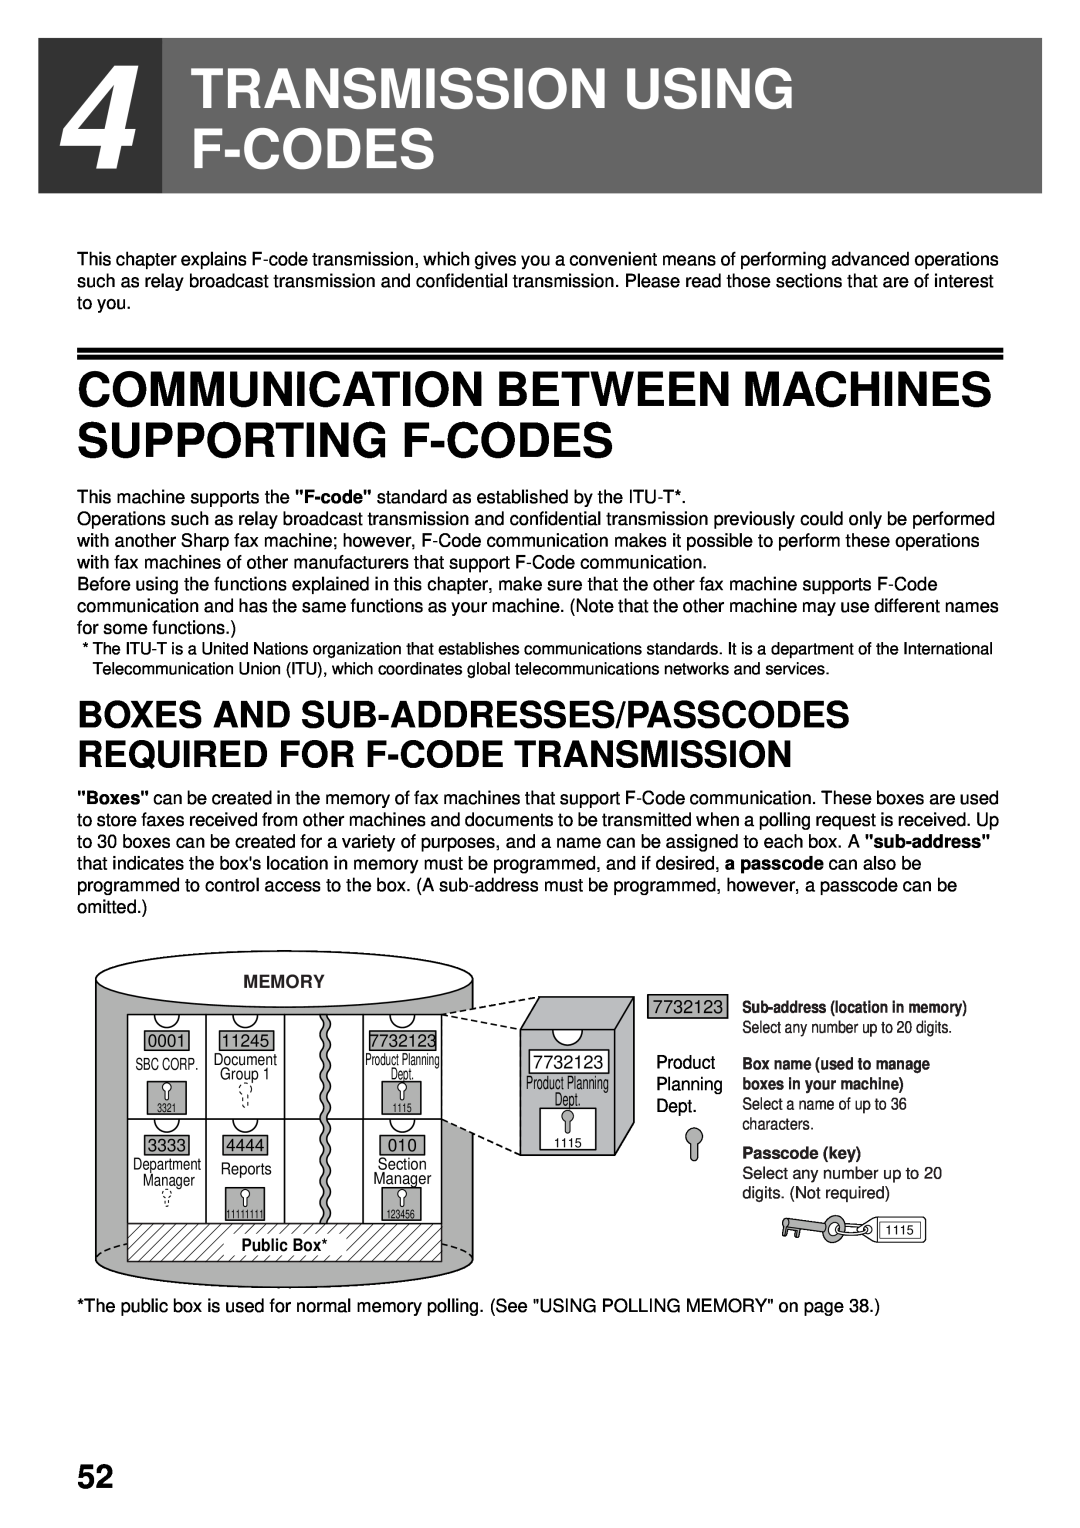 Sharp MX-FX13 appendix Transmission Using F-Codes, Communication Between Machines Supporting F-Codes, Memory, Public Box 